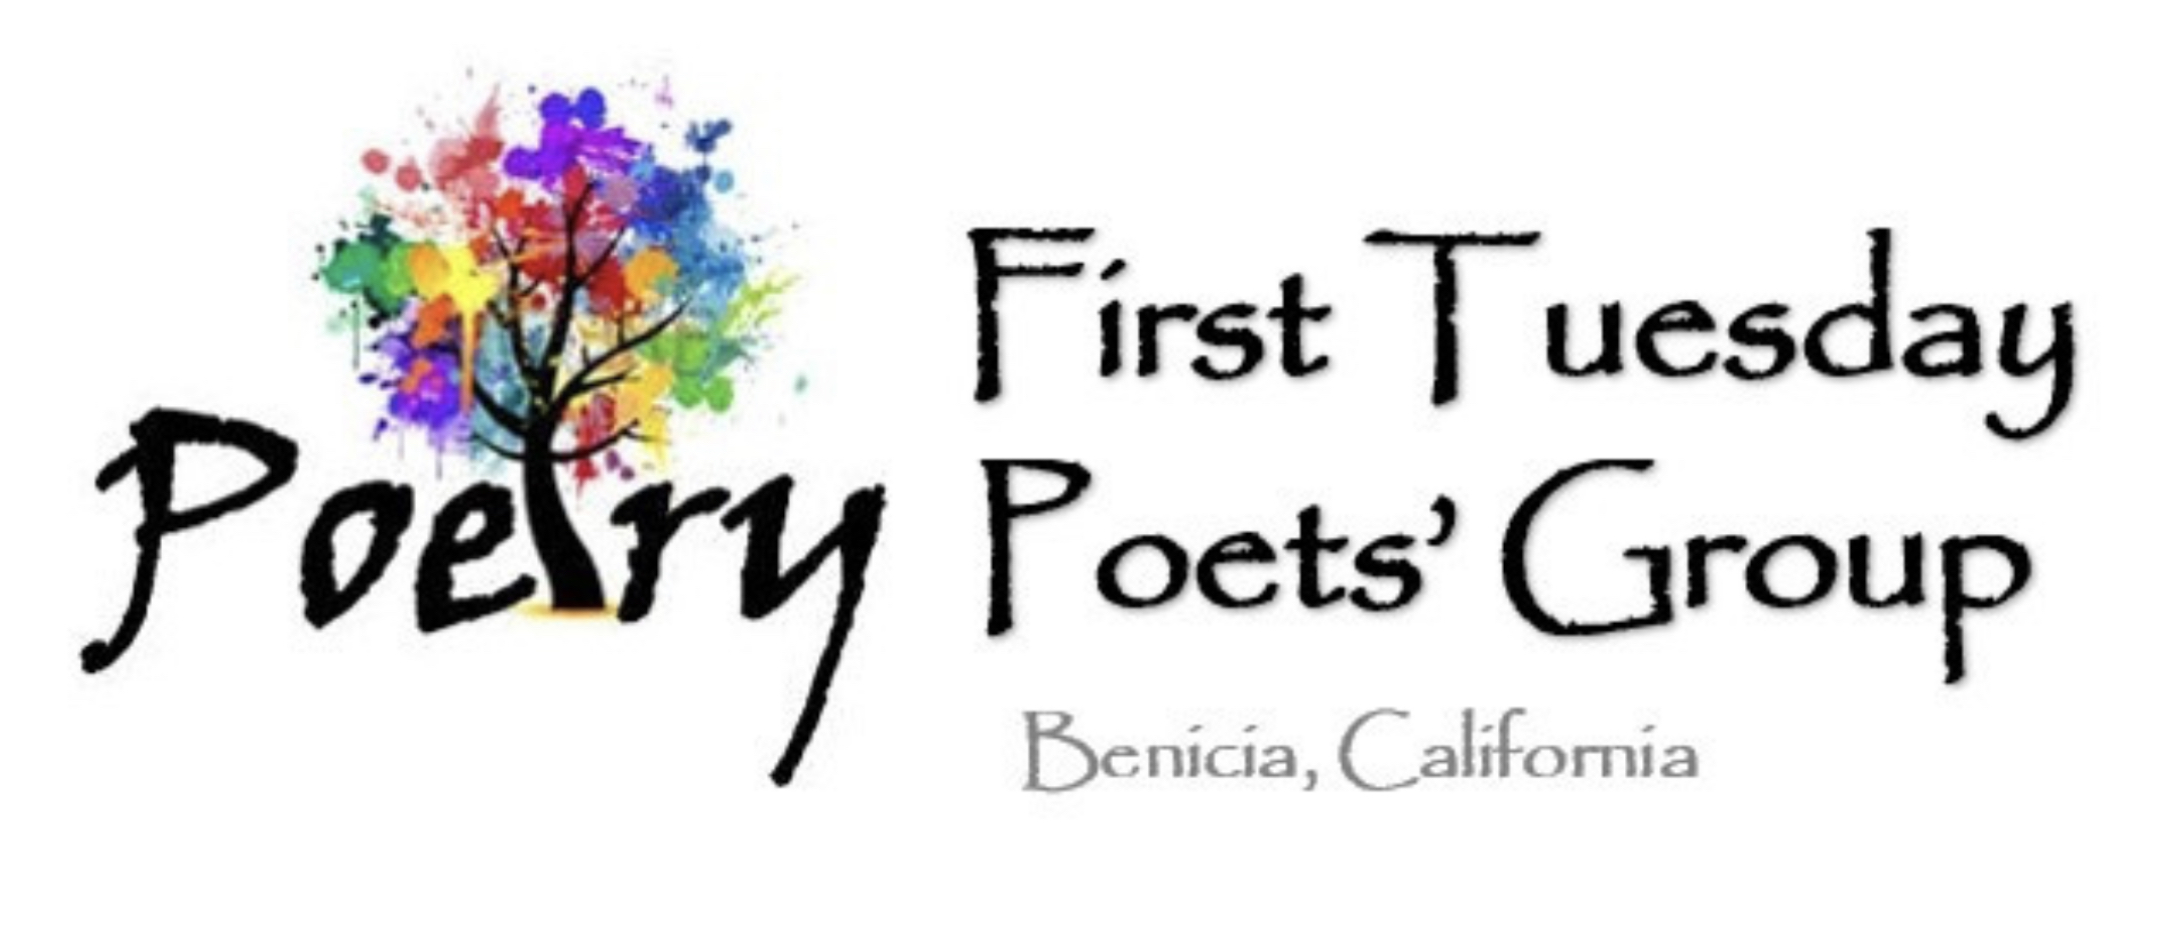 Benicia First Tuesday Poets